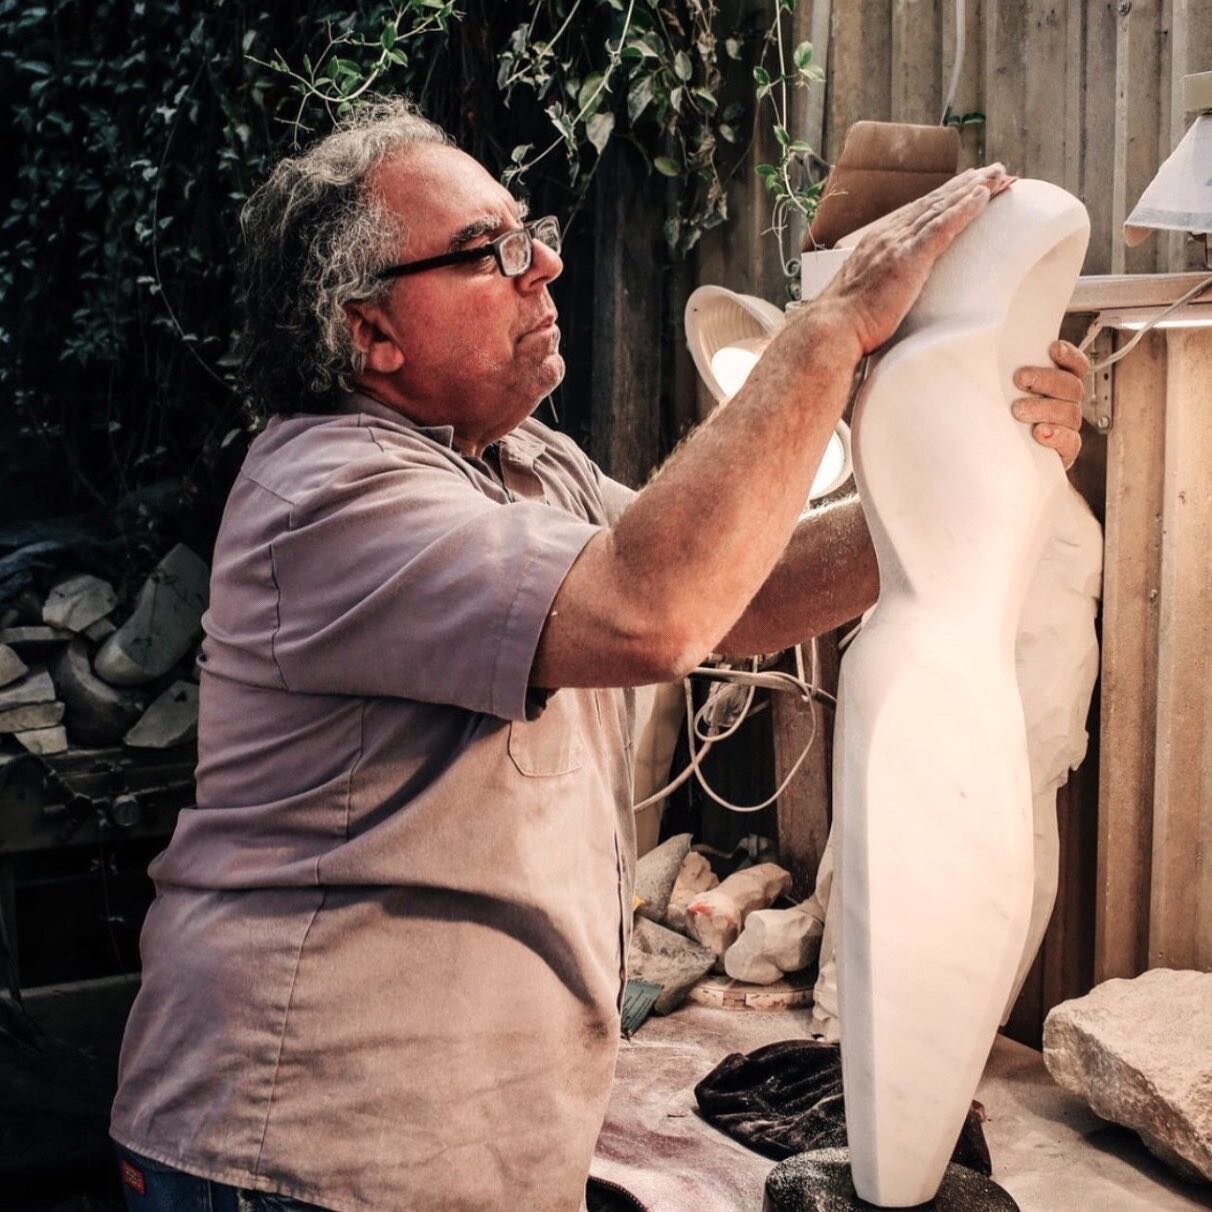 LBG artist Steven Lustig finishing off one of his beautiful stone sculptures.
&bull;
&bull;
For more details &amp; purchase information please visit our website labottegagallery.com or message us directly. 
&bull;
&bull;
📸 @happylustig 
&spades;️ Fo